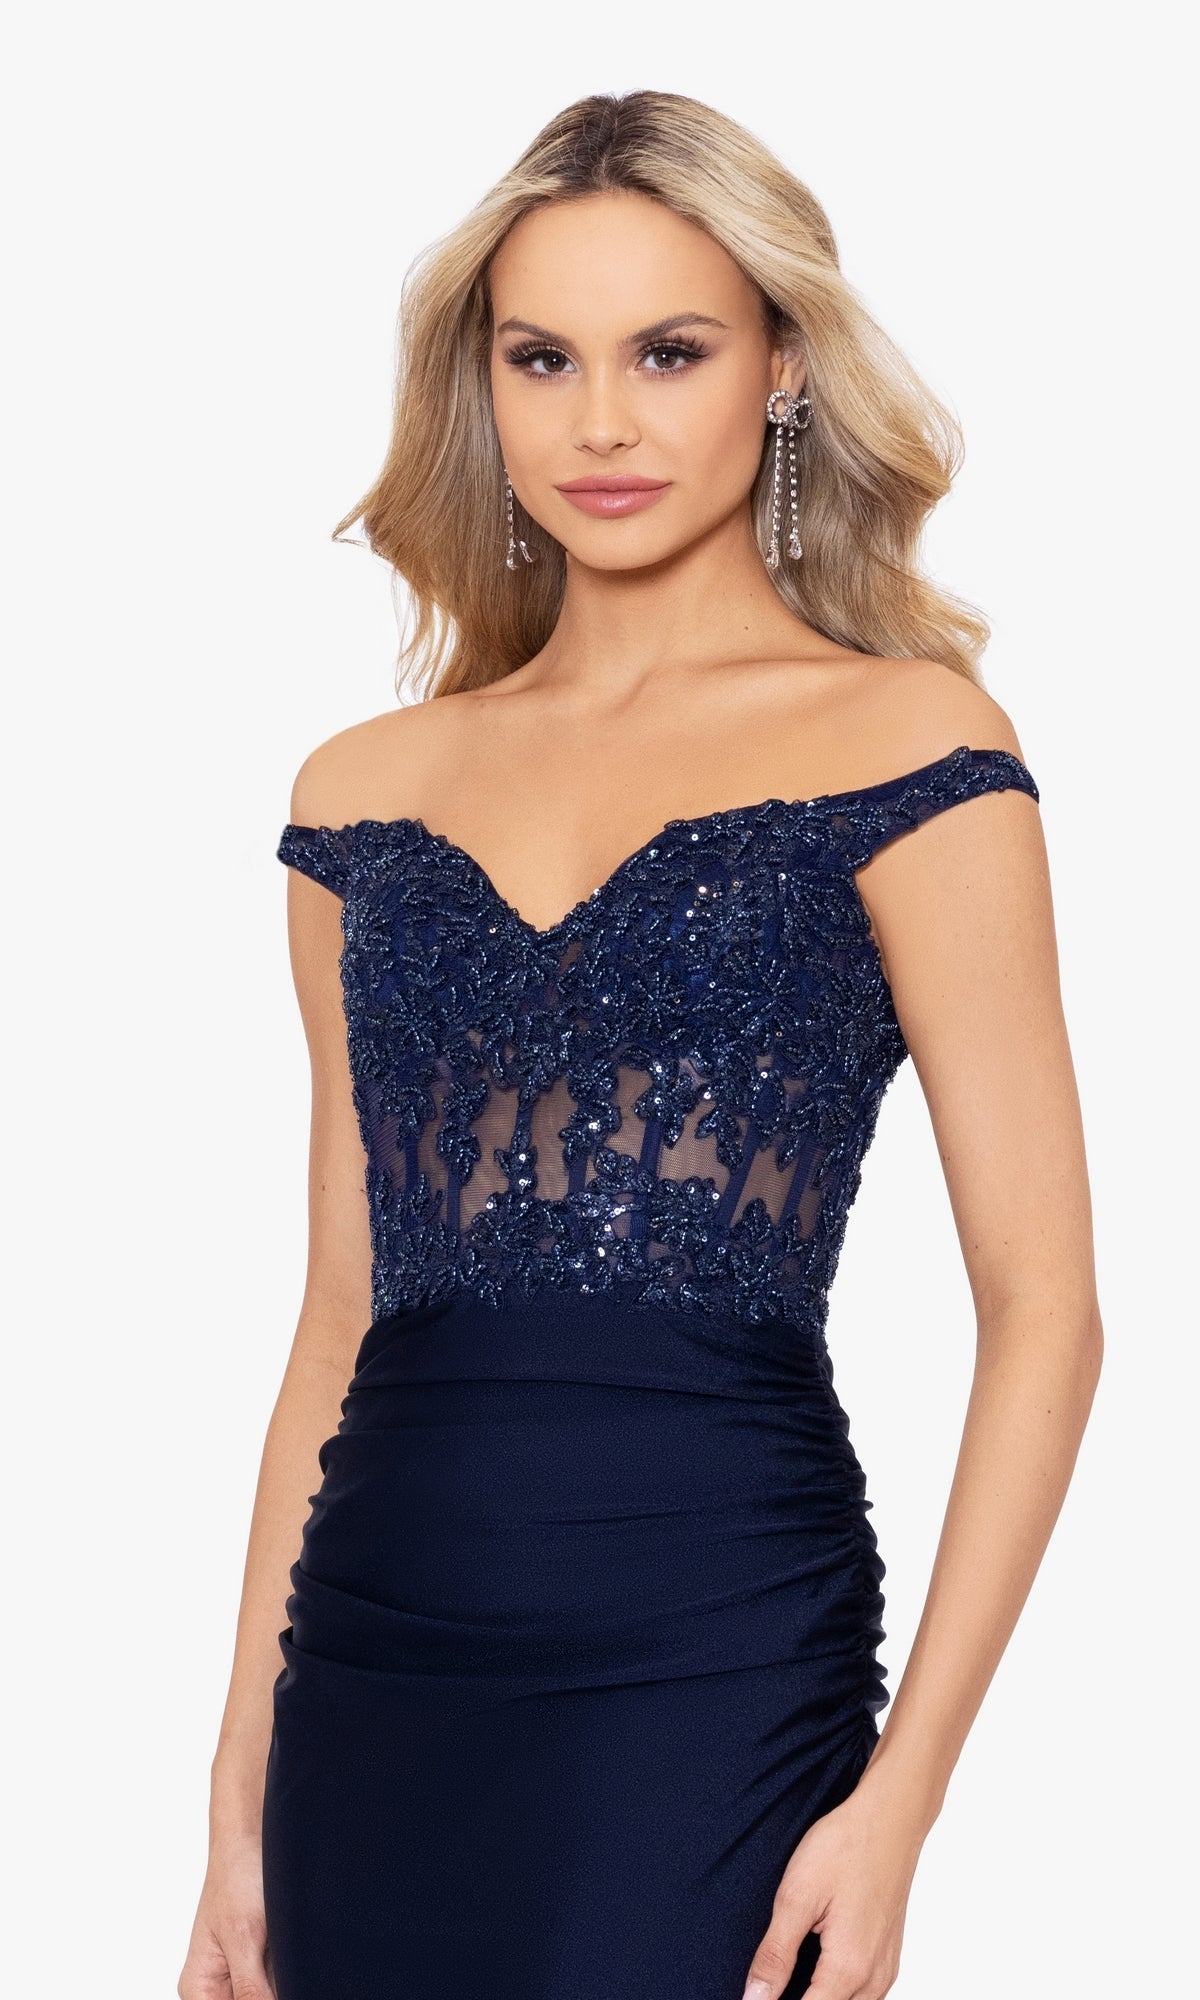 Off-the-Shoulder Long Navy Prom Dress A26276